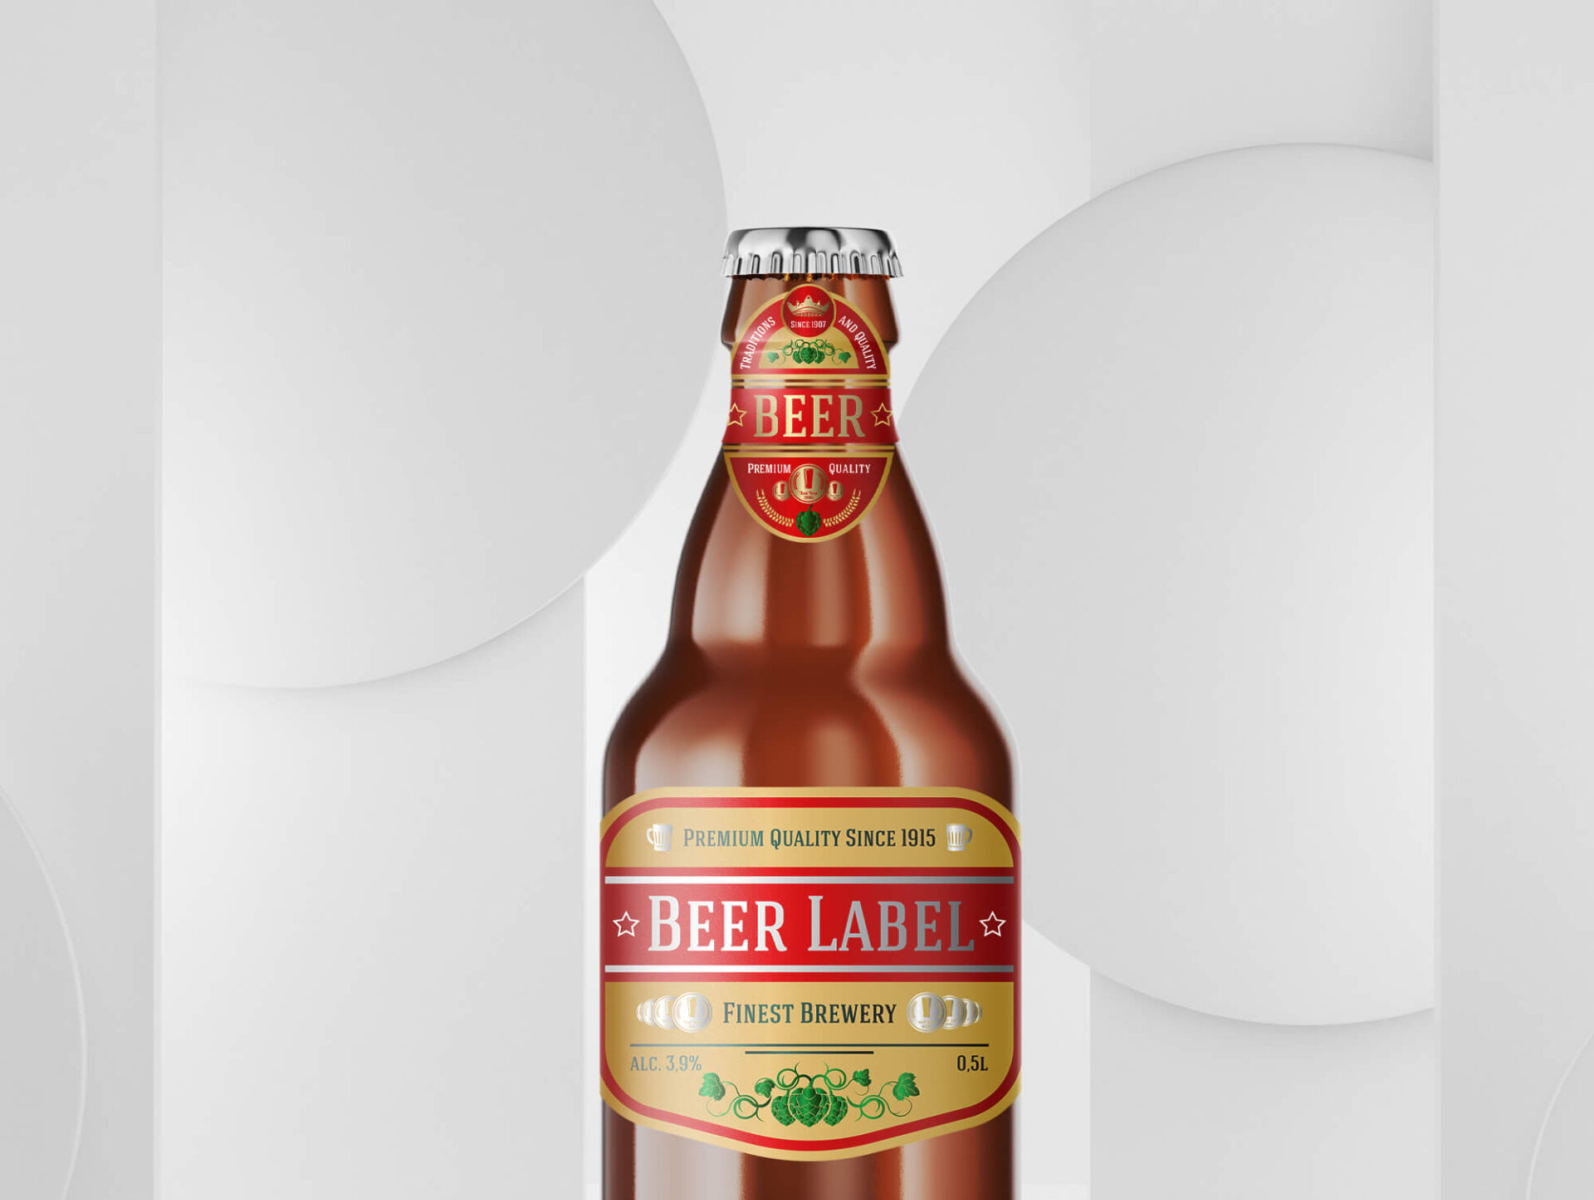 Free Beer Label Mockup PSD Template by Mockup Den on Dribbble Intended For Beer Label Template Psd